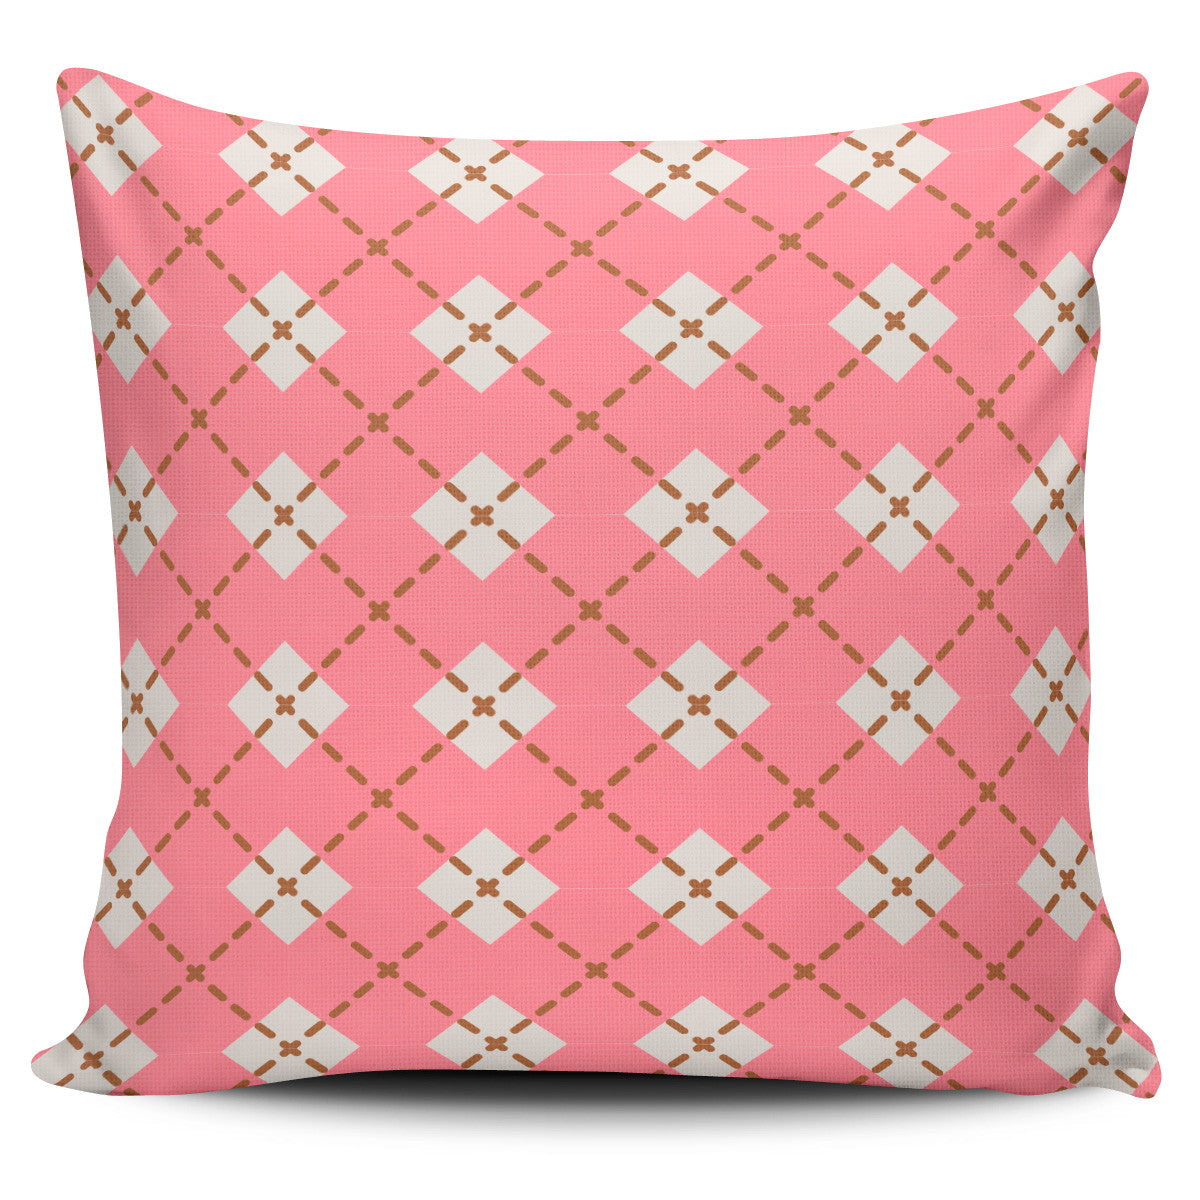 Pink and Blue Abstract Cushion Covers Pack of 4